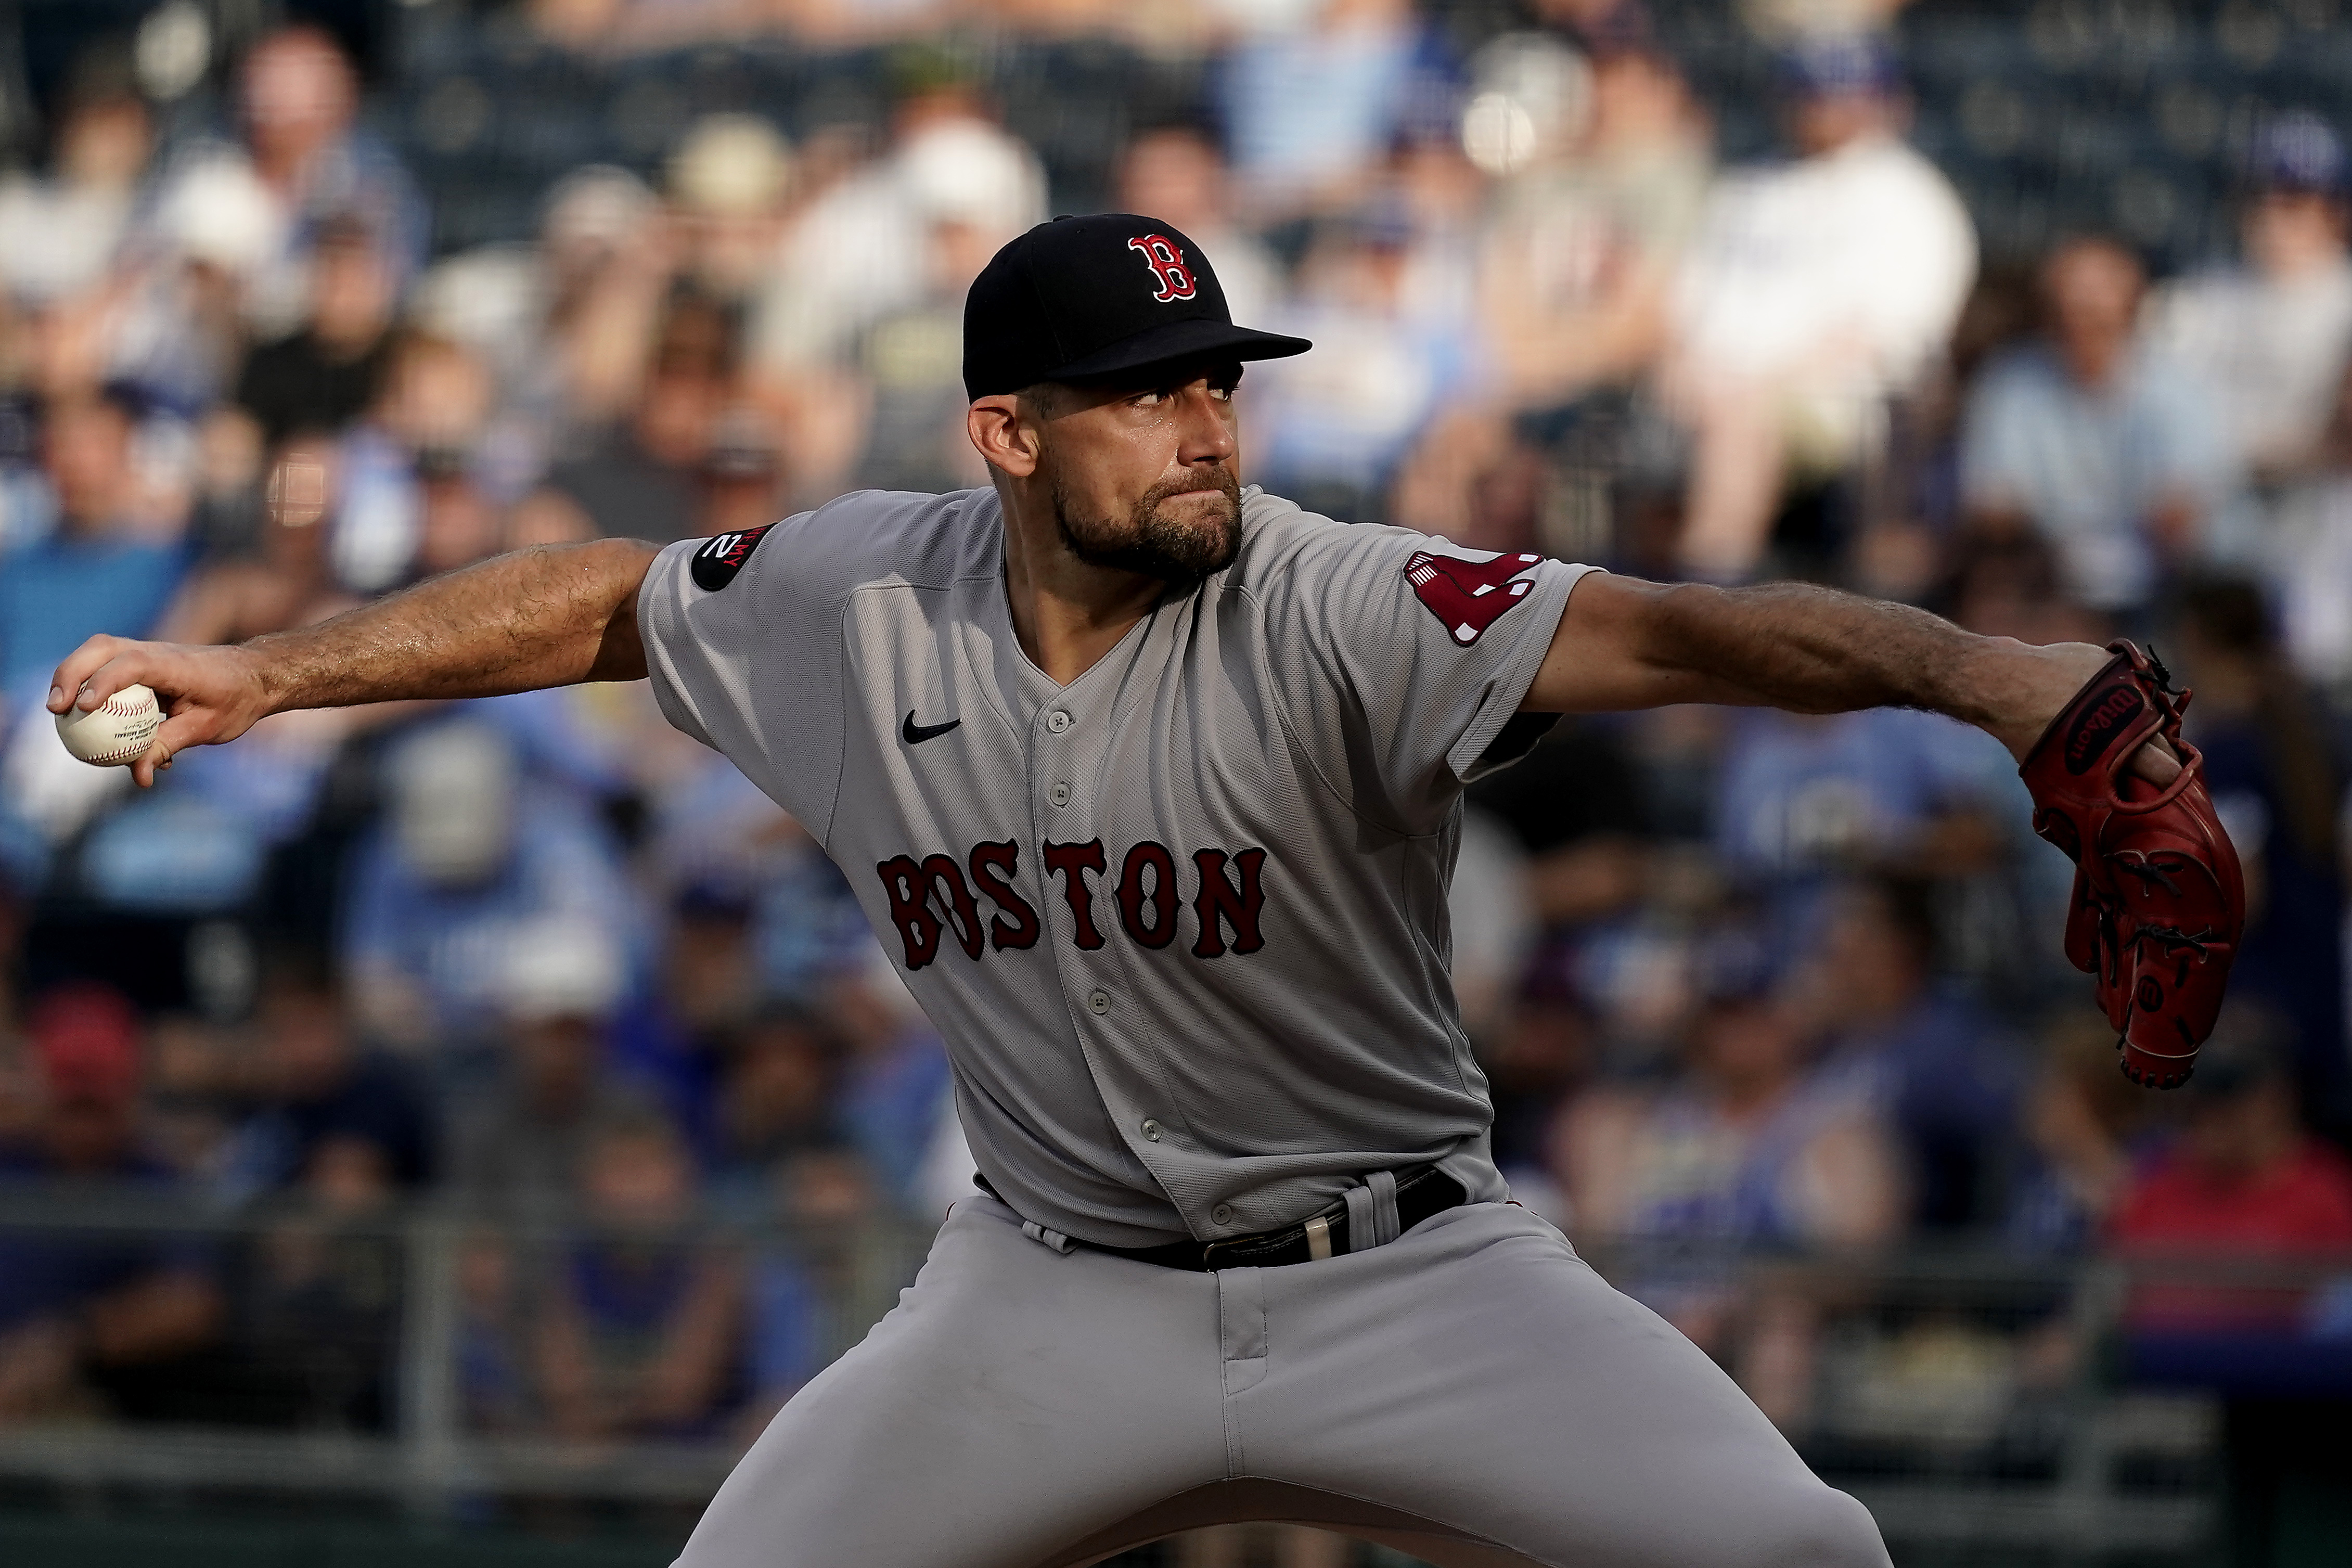 Nate Eovaldi declines the Red Sox' qualifying offer and will